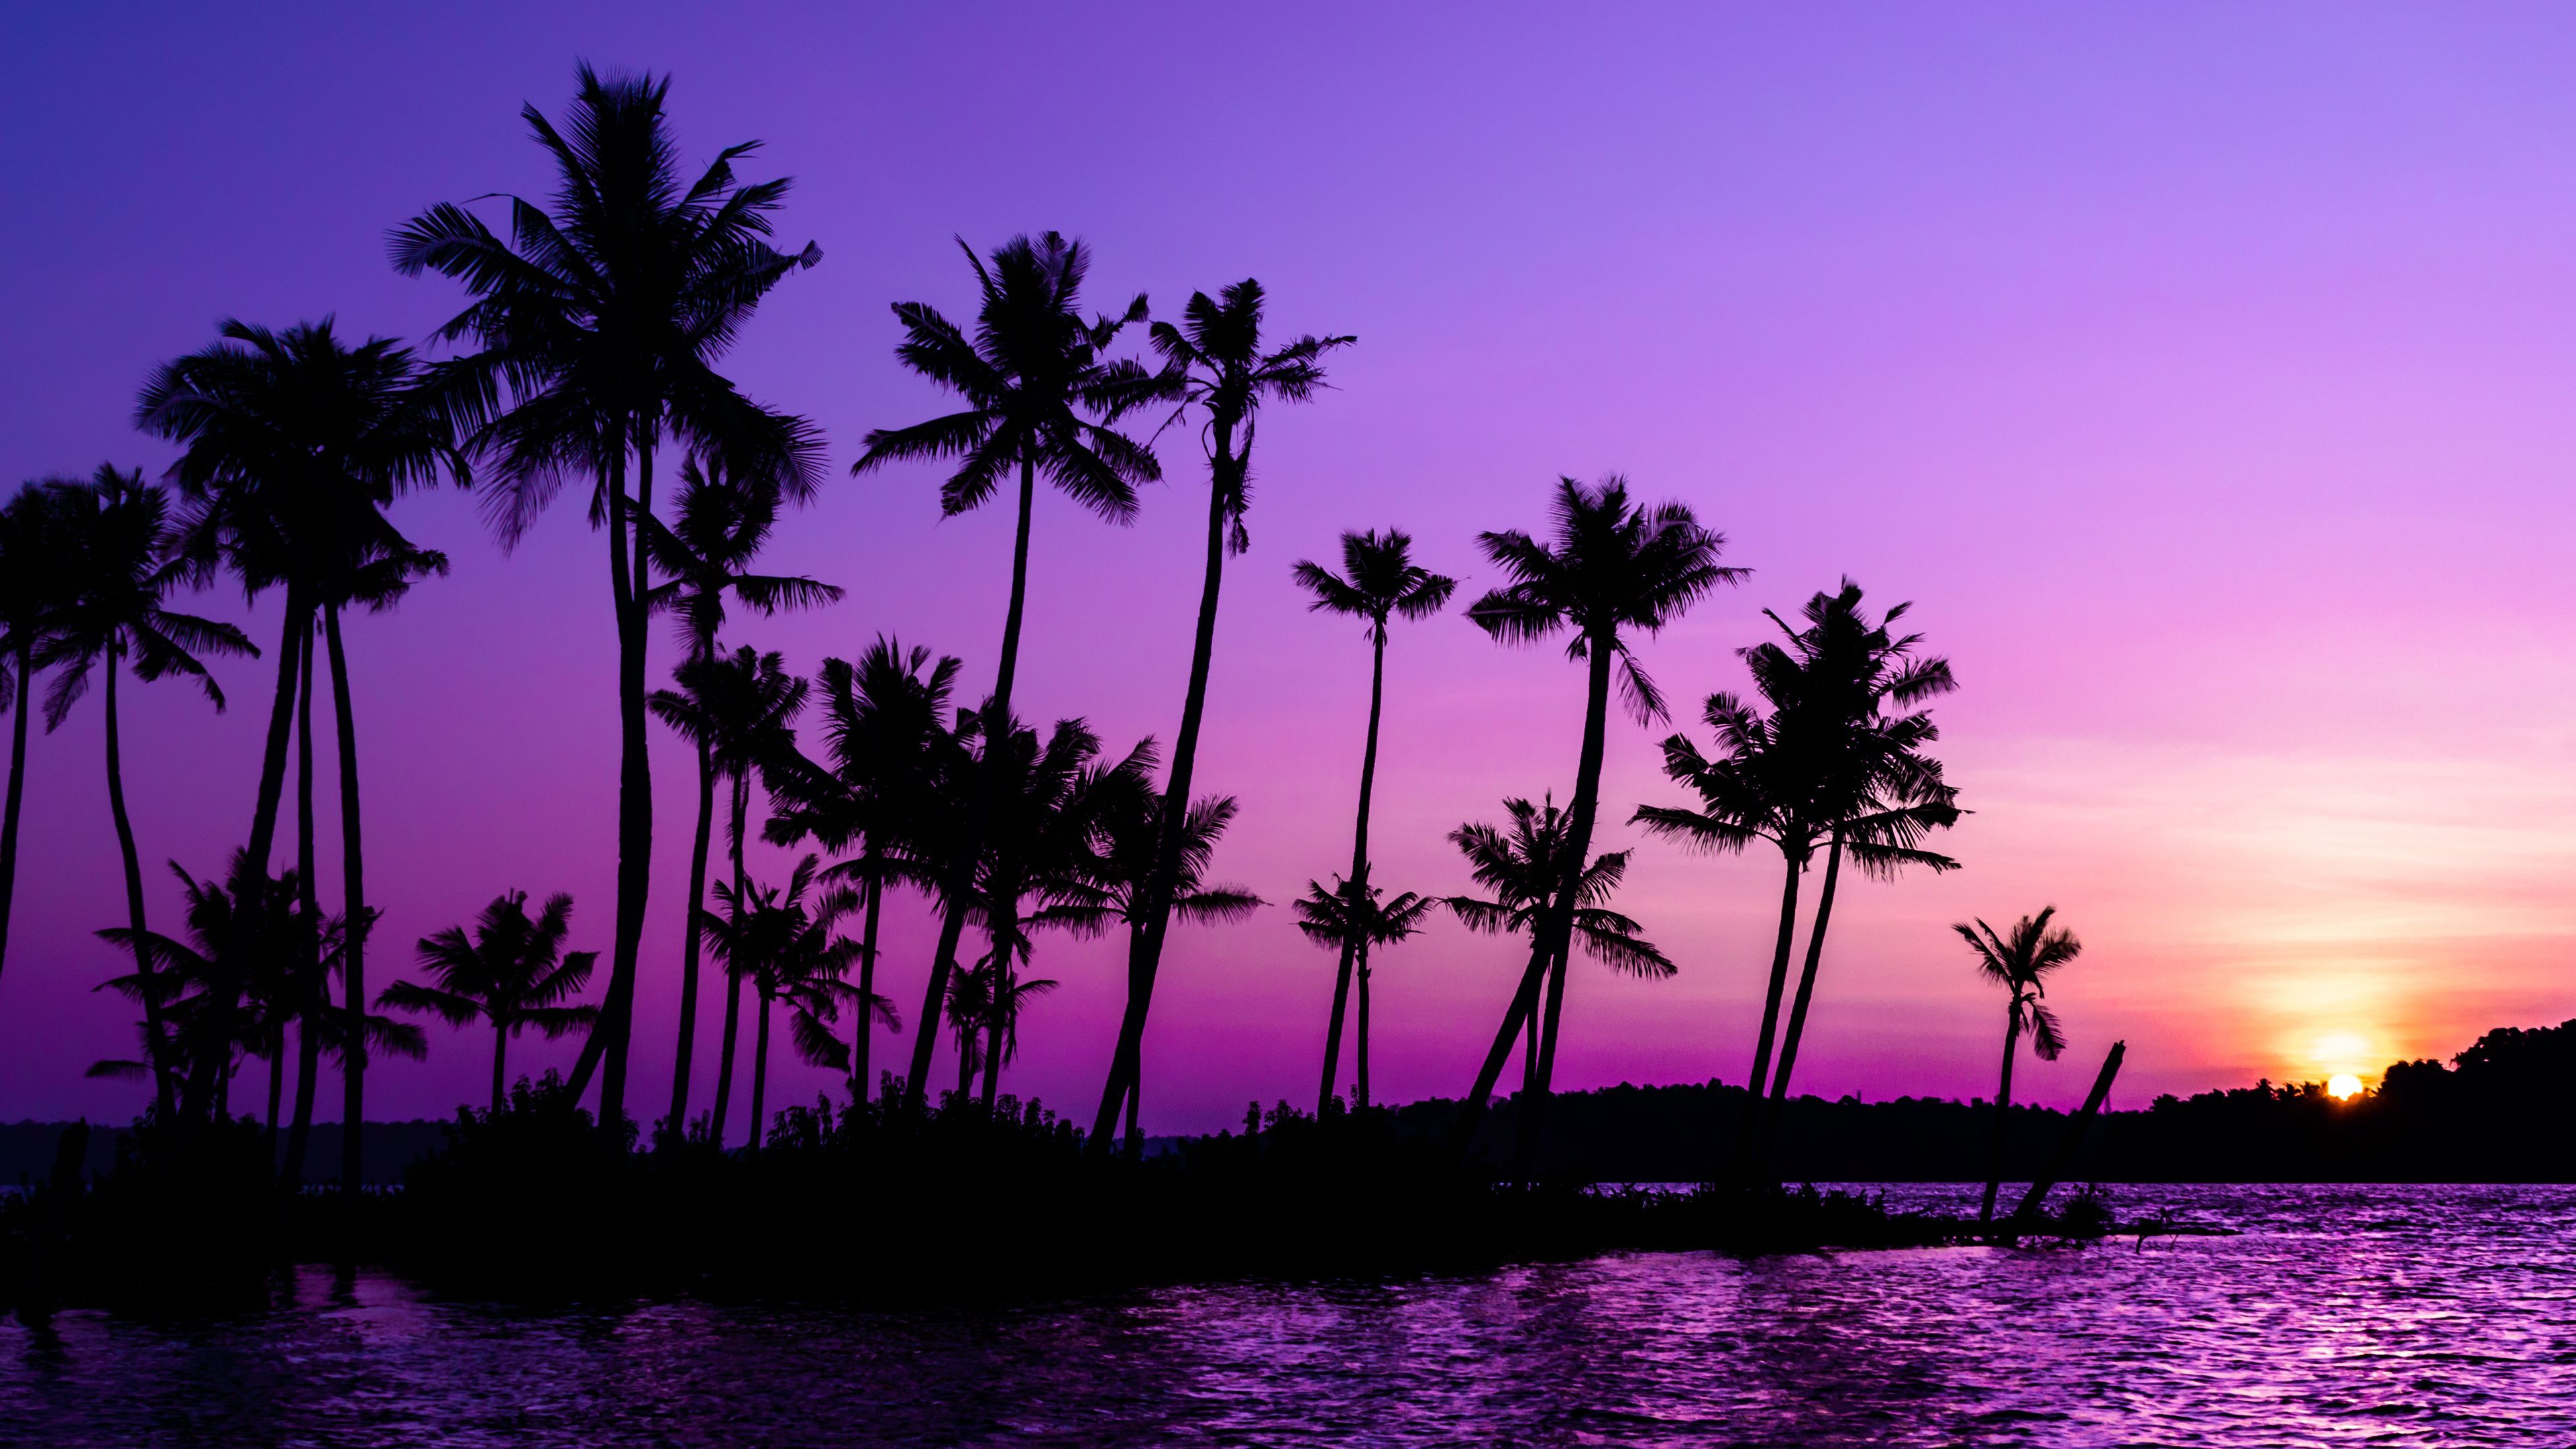 Download wallpaper 3840x2160 palm trees, silhouette, sunset, purple 4k uhd 16:9 HD background